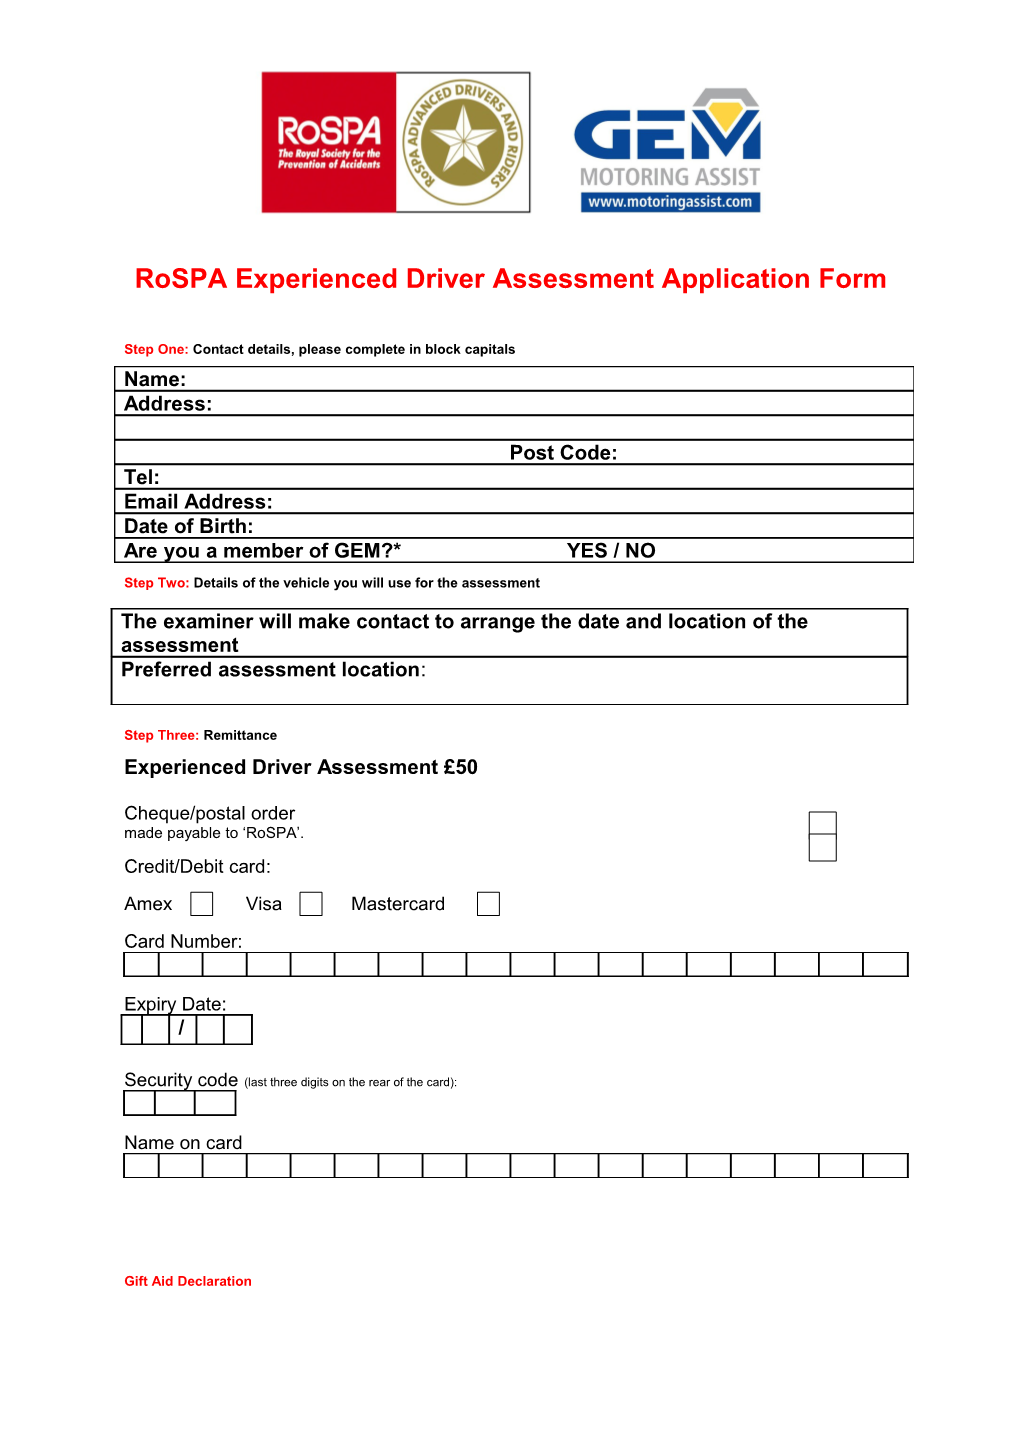 Experienced Driver Assessment Application Form